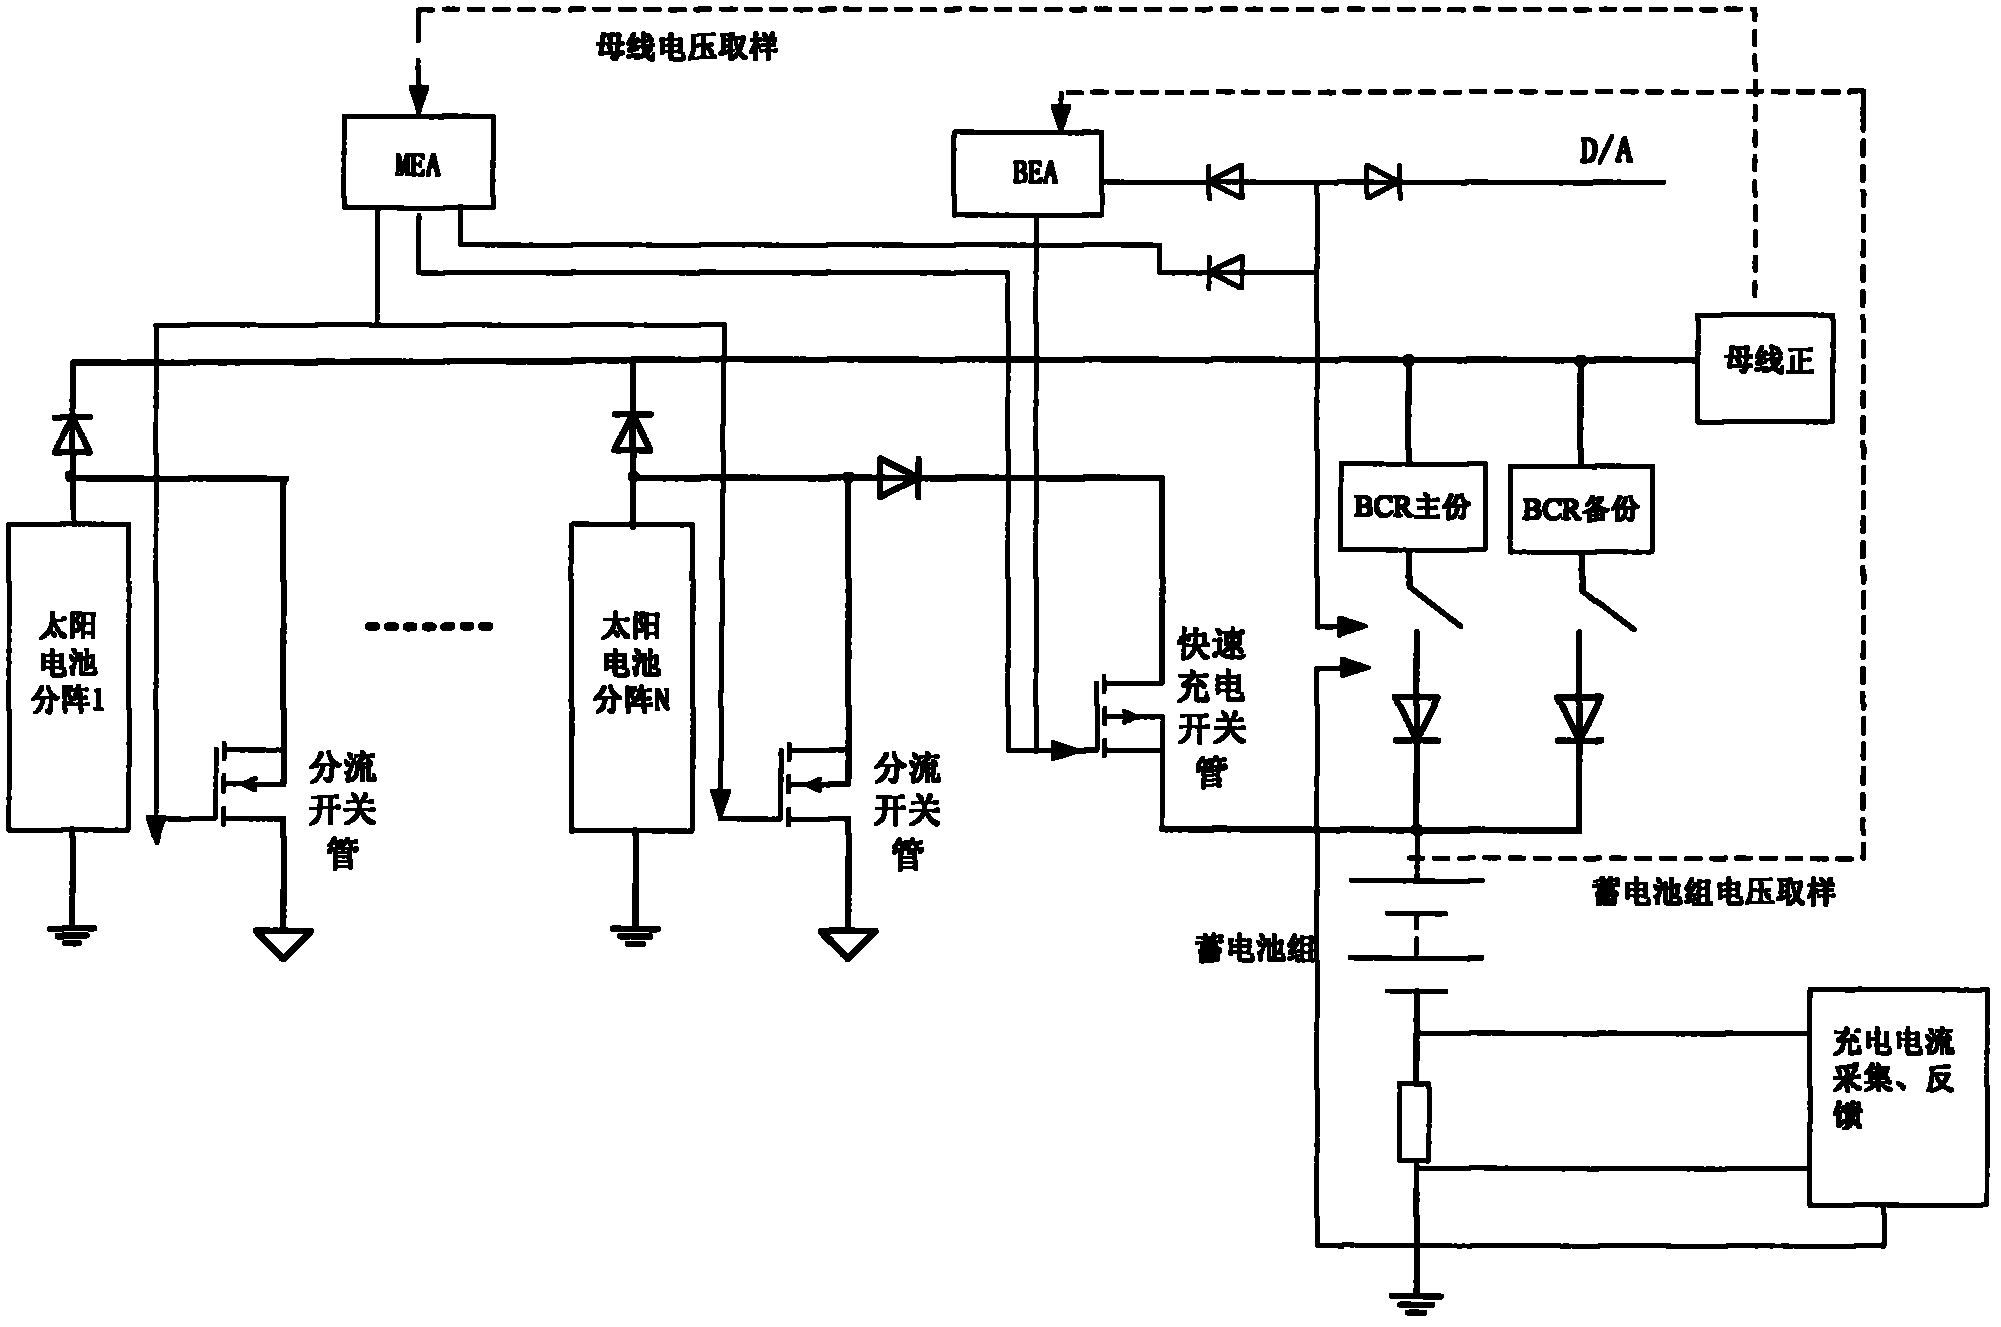 Lithium ion storage battery charging method based on sequential shunt switching regulation (S3R)